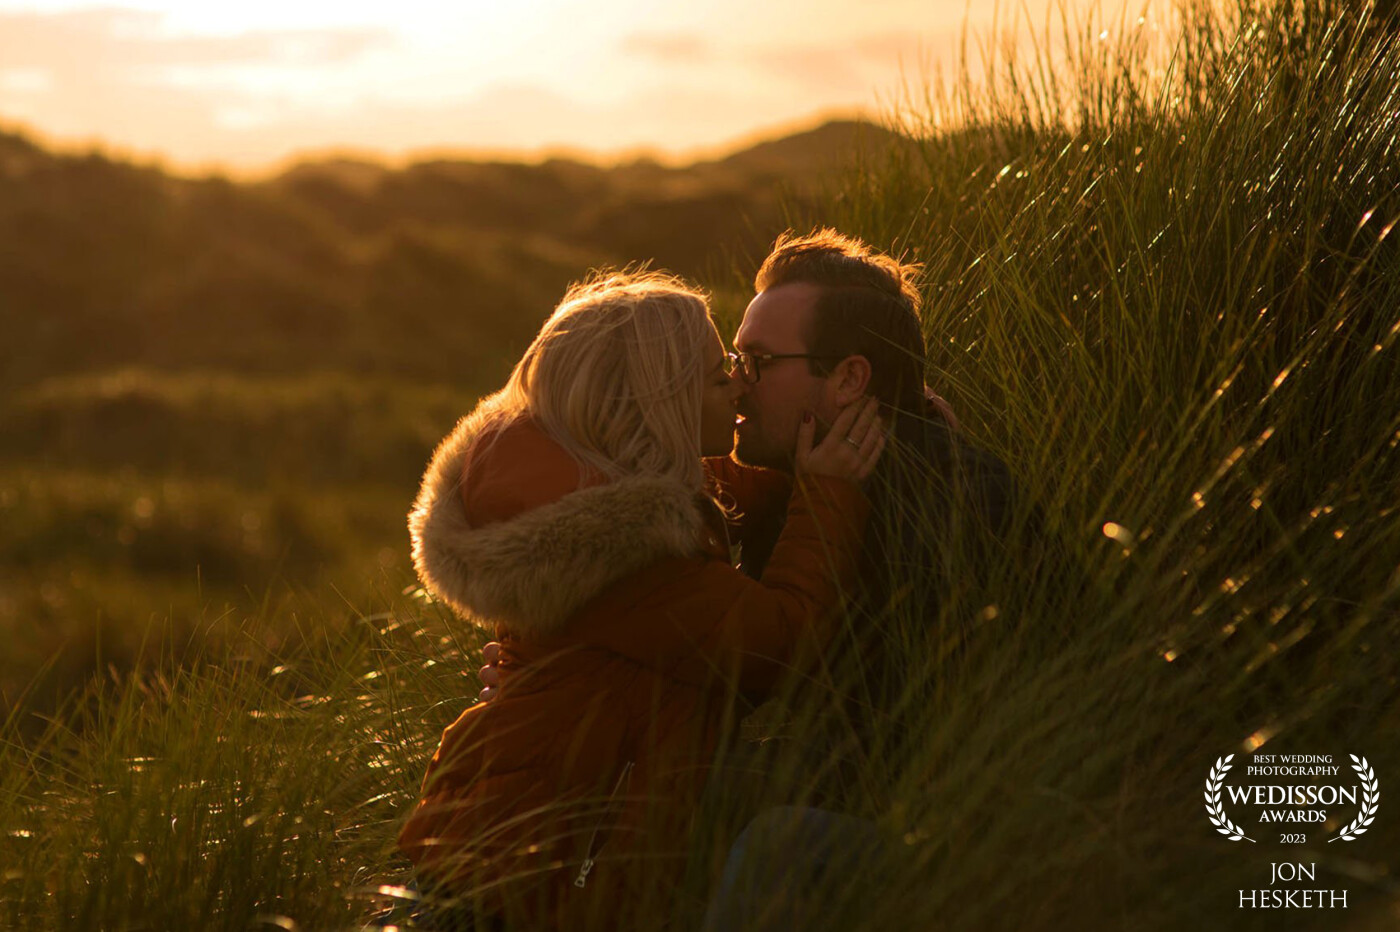 This was taken at Talacre Beach, North Wales, at sunset. The way the light bounced off the reeds and the intimacy between my couple gave such a beautiful moment to capture.